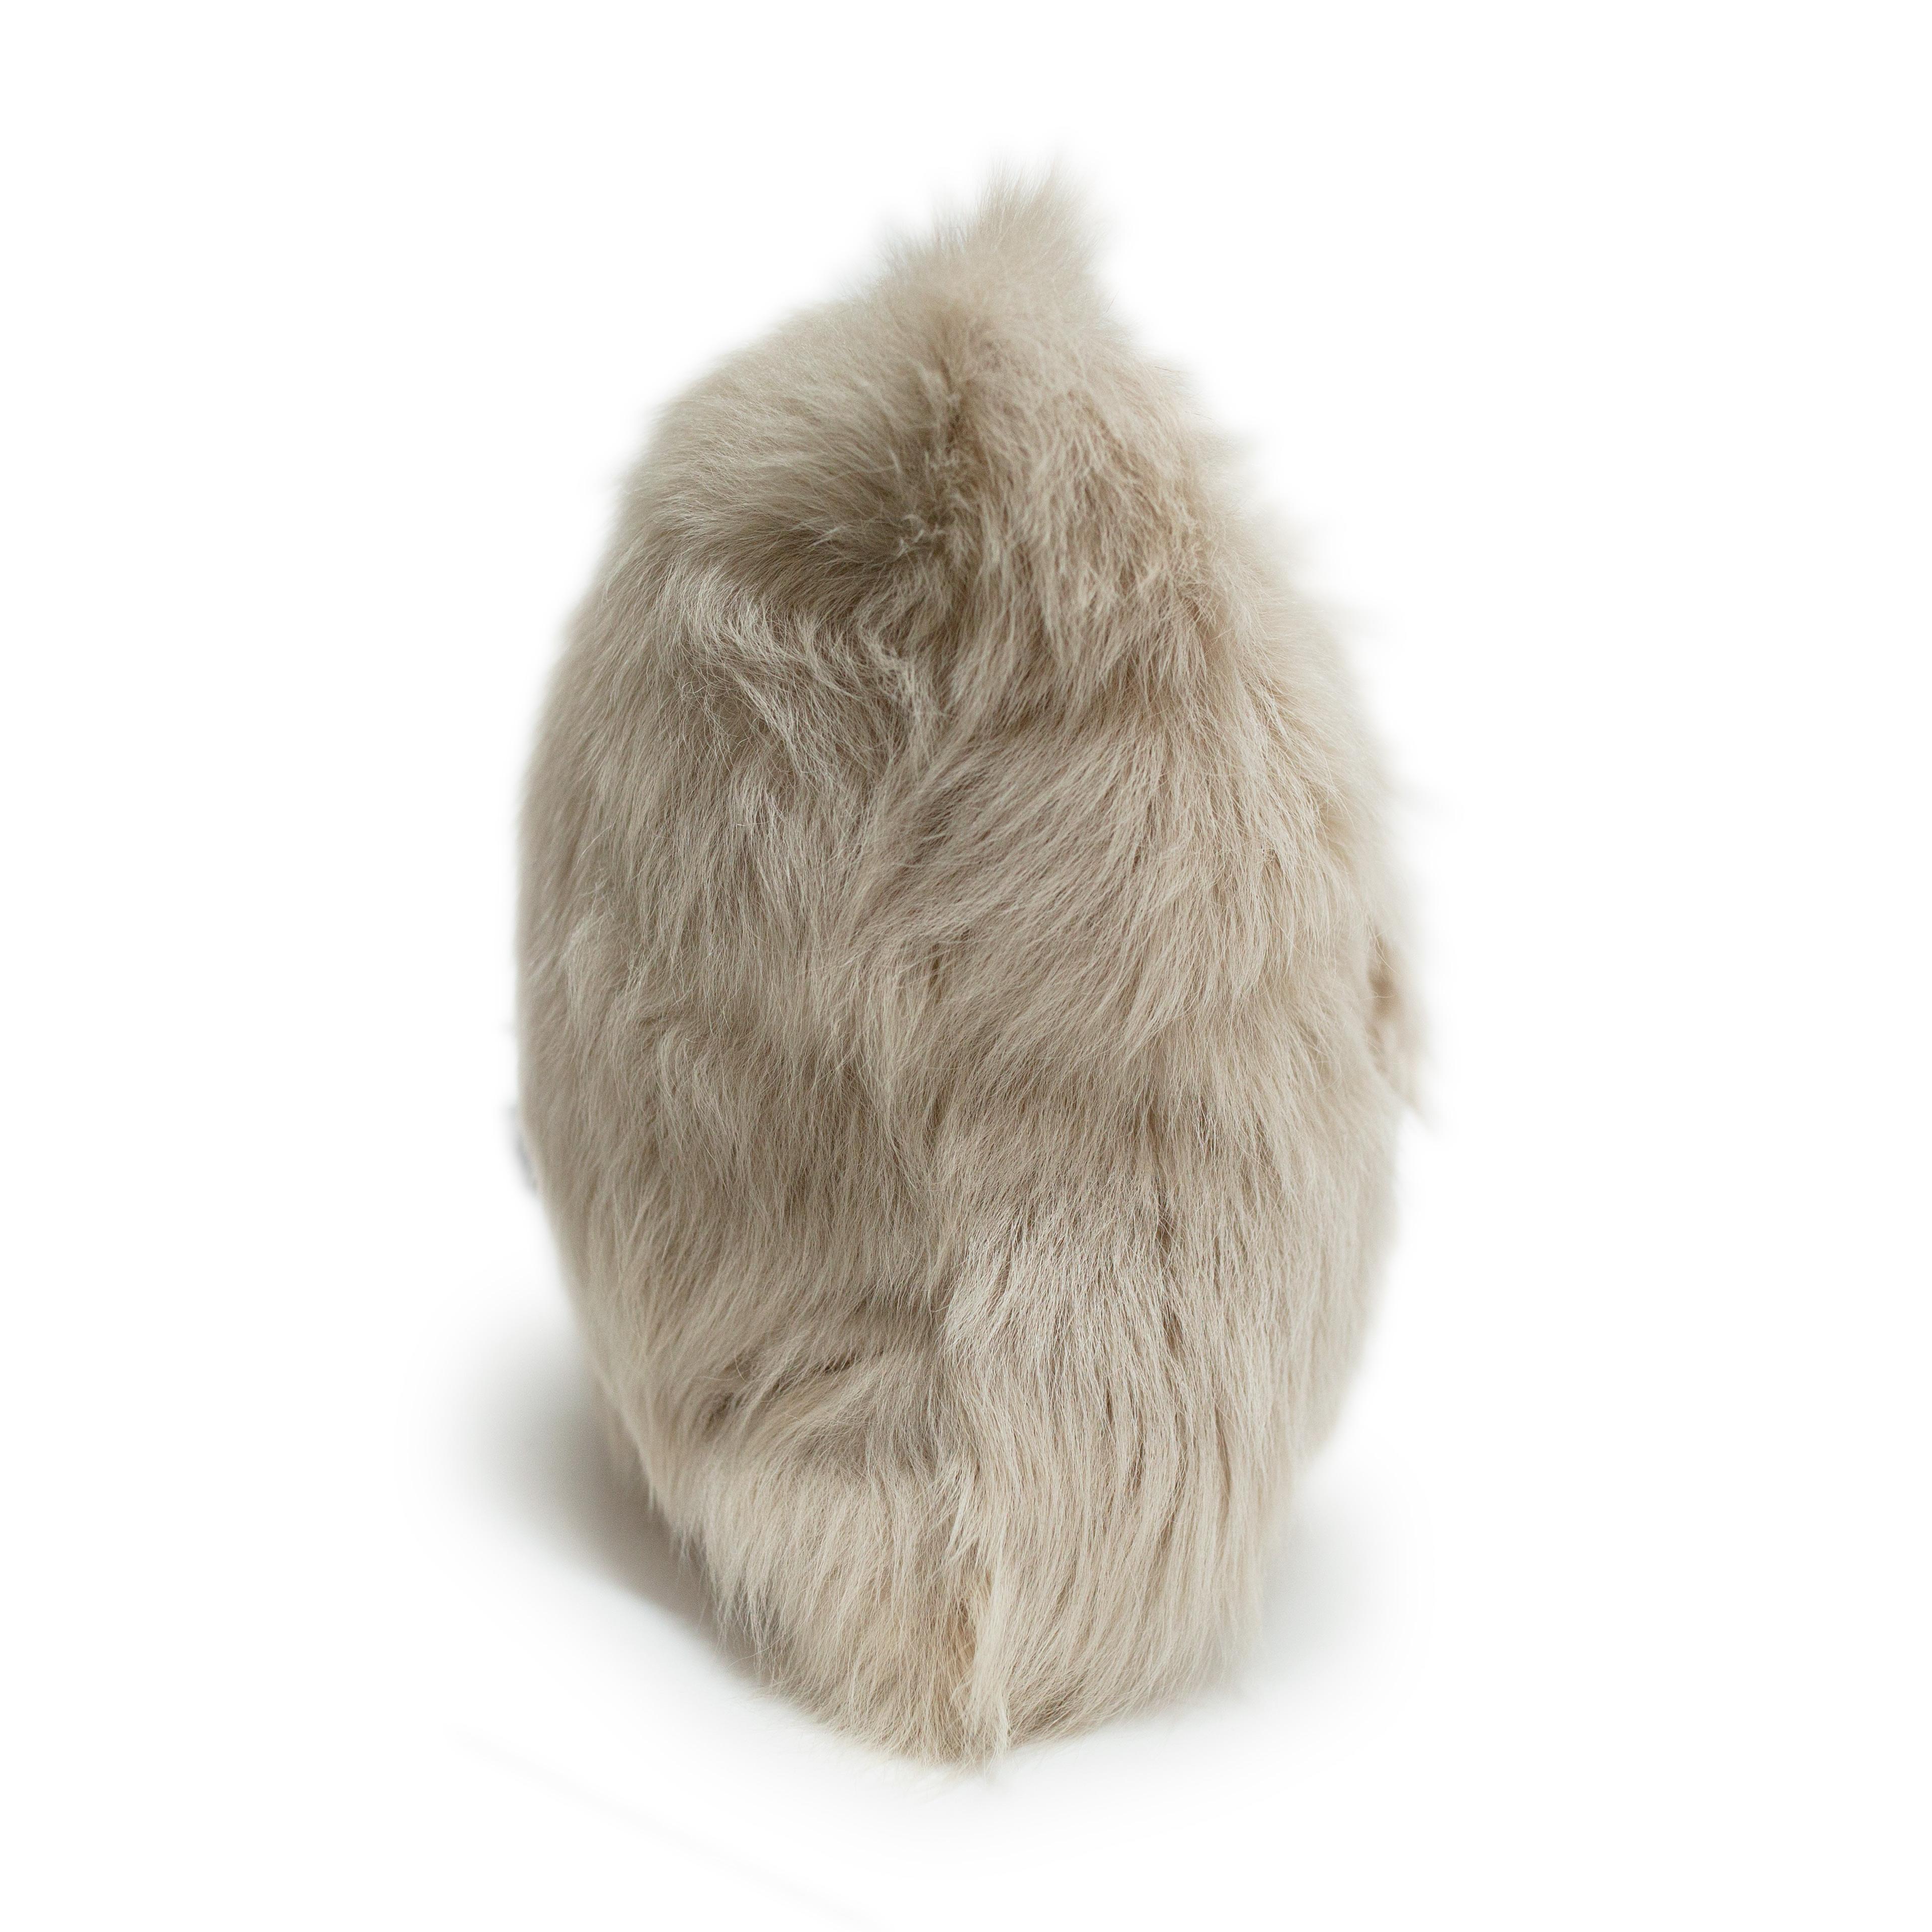 Our Toscana real fur fabric is made to our specifications from glove factory remnants. As part of our up cycled, re-purposed fur from our popular UNFORBIDDEN FUR collection, Bone is the new color this season.

Soft and durable, this makes a